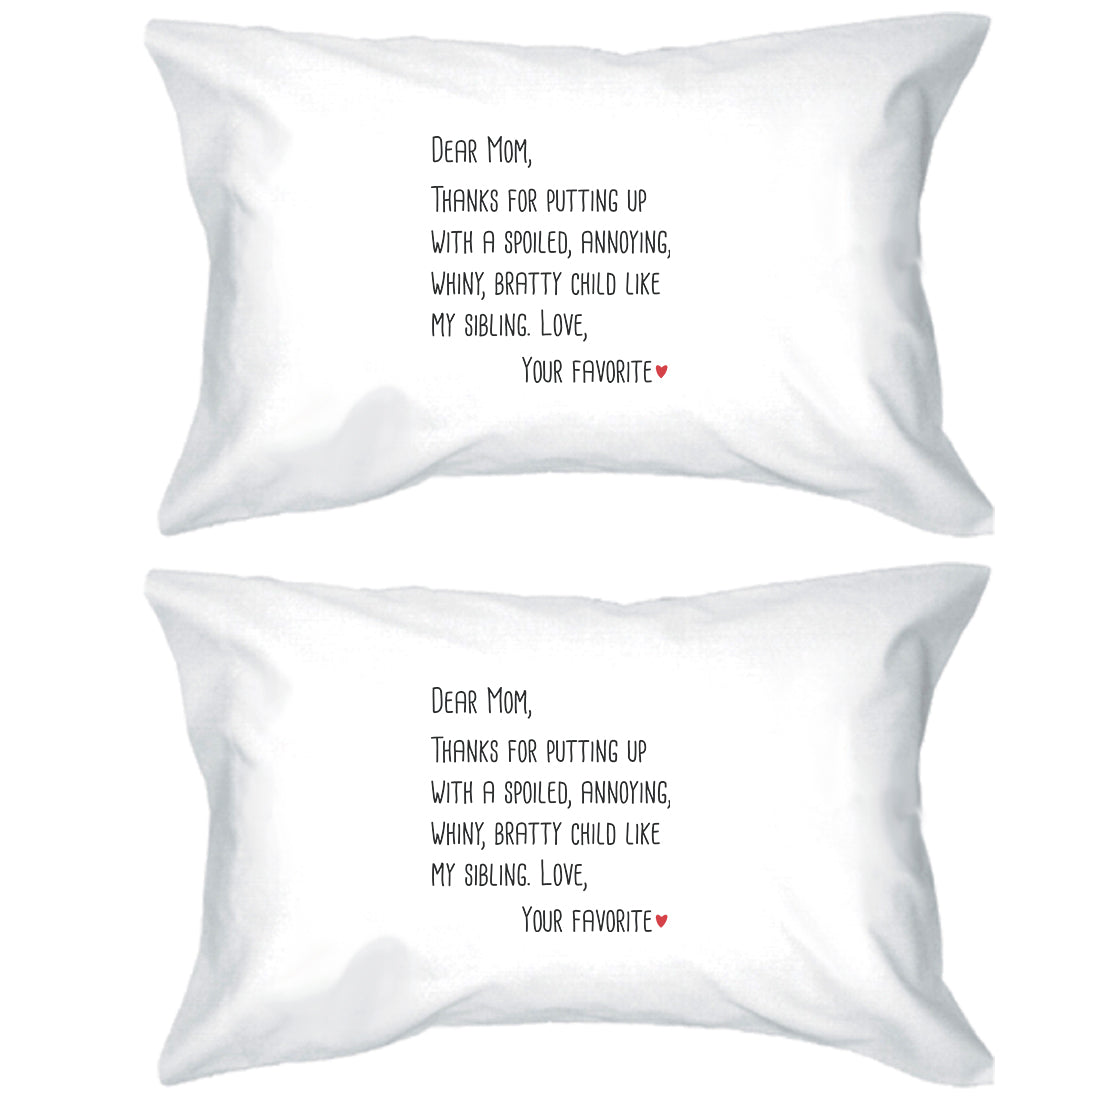 Dear Mom Graphic Pillowcases Standard Size Cotton Pillow Covers White